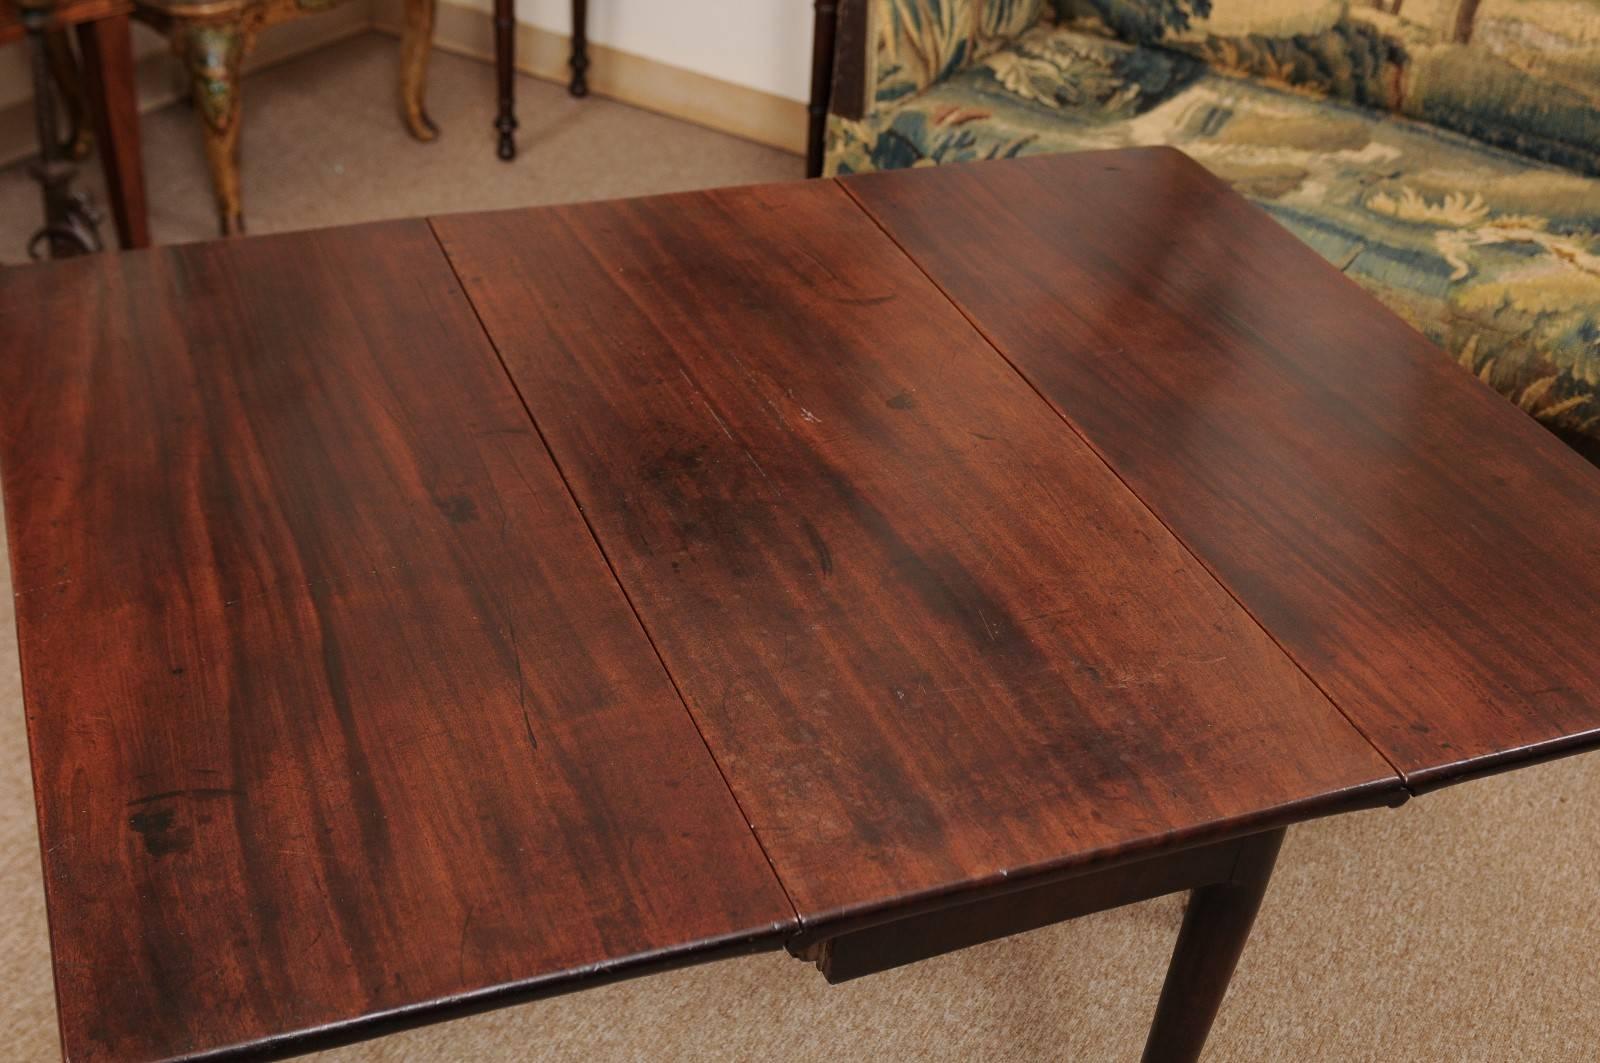 18th Century Mahogany Drop Leaf Table with Pad Feet, England For Sale 5